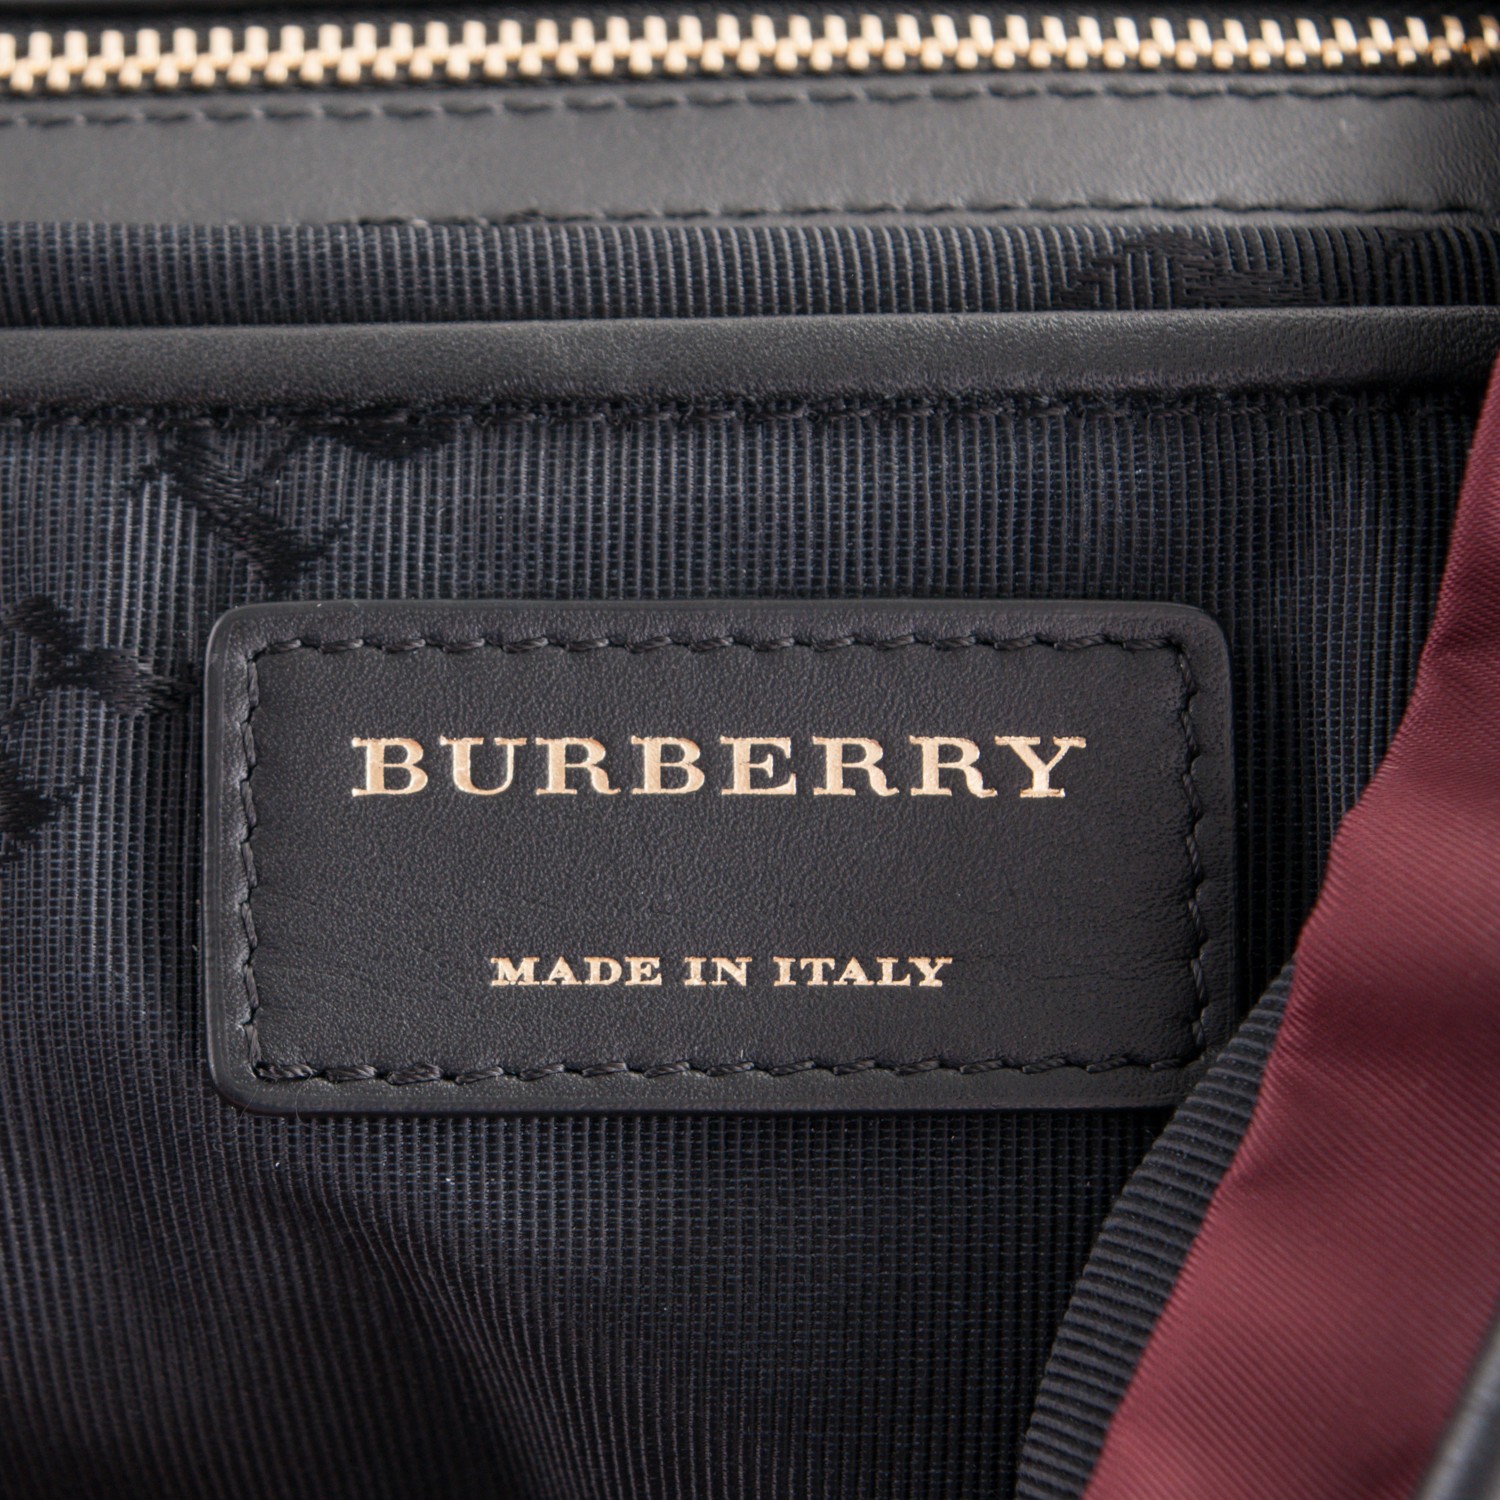 Burberry leather label